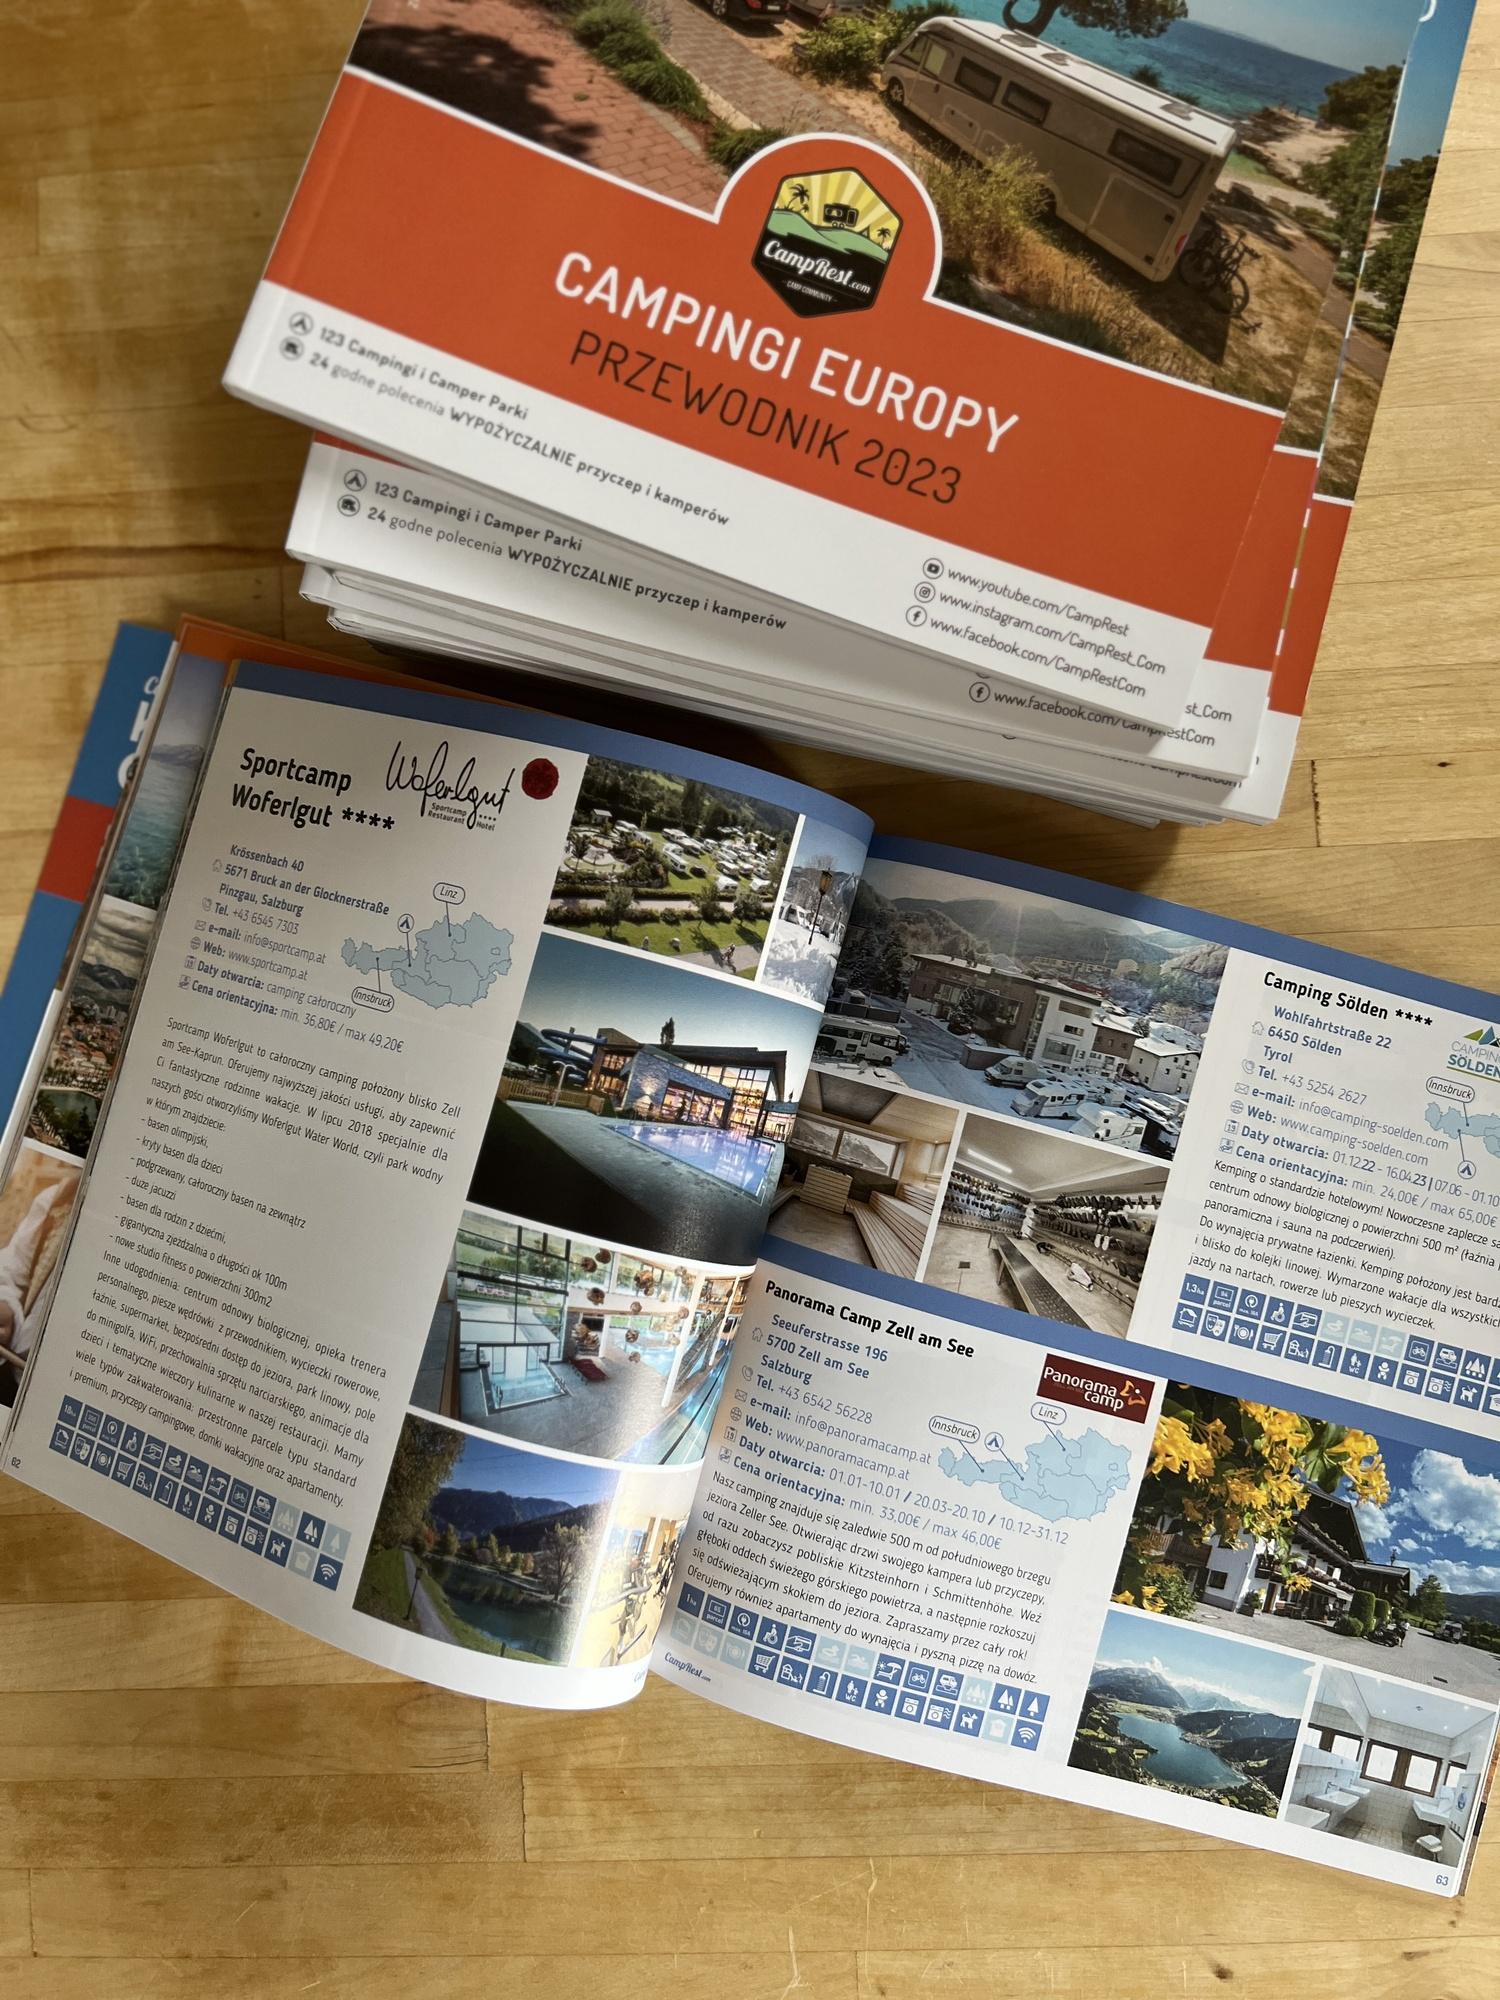 Camping Europe Guide 2023 - how to get it? – image 3